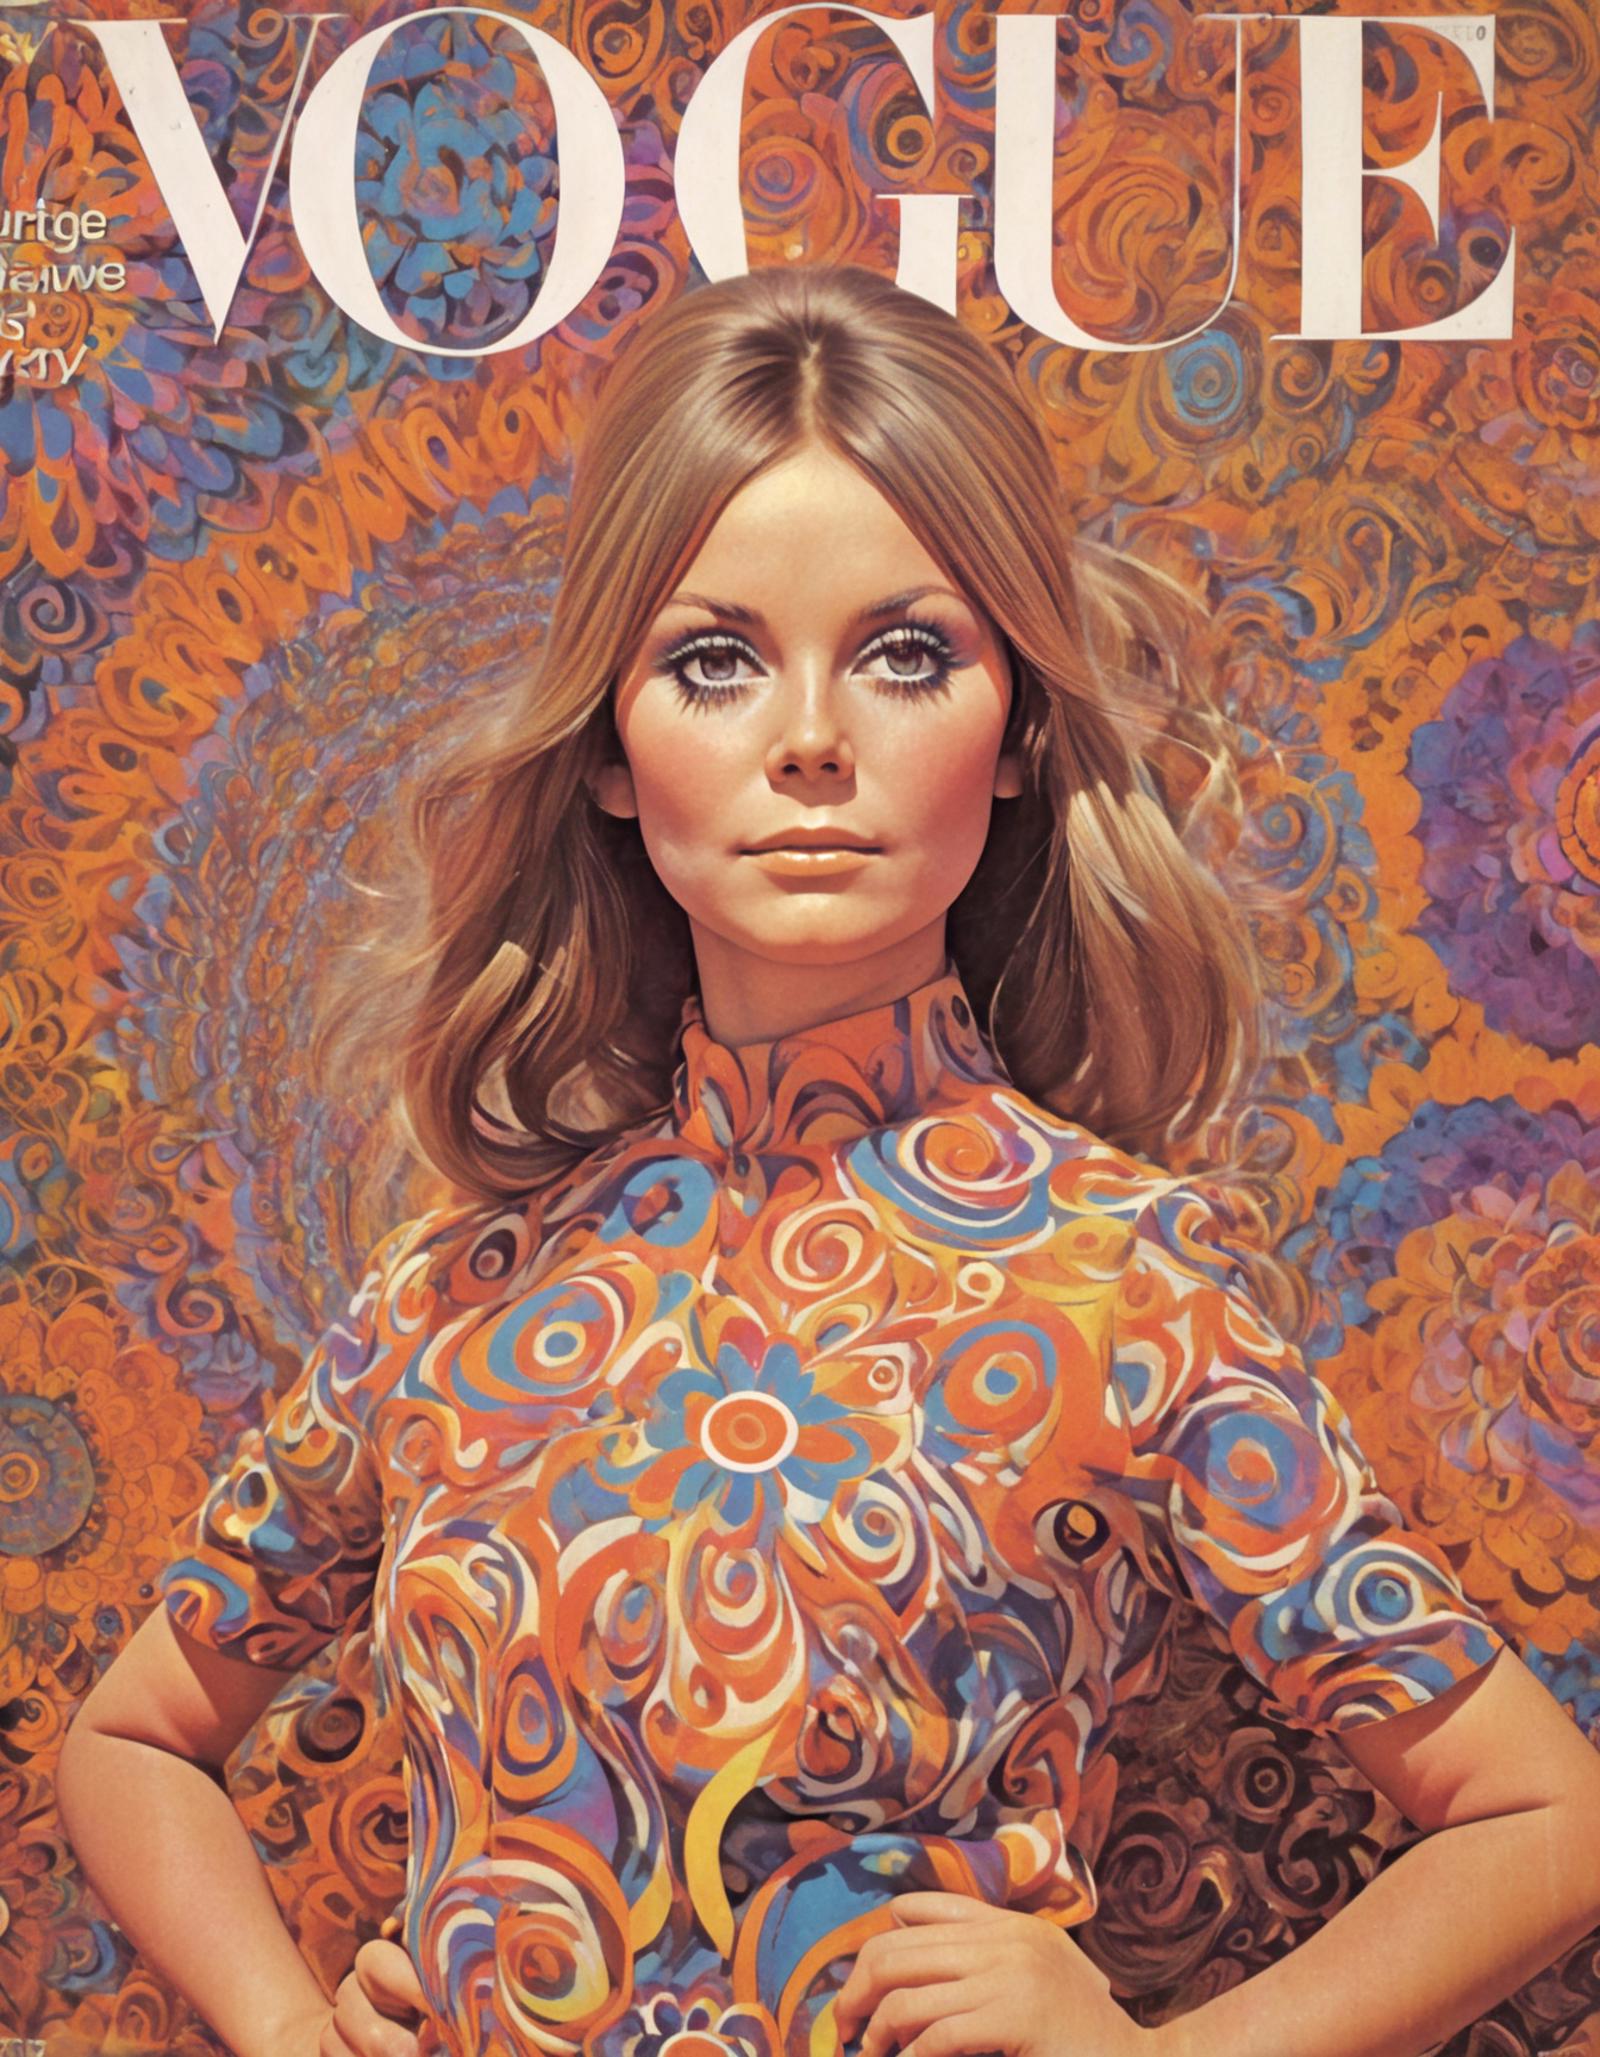 VOGUE (Fashion Magazine Cover Vintage 1960-1975) {Style} [SDXL] image by denrakeiw